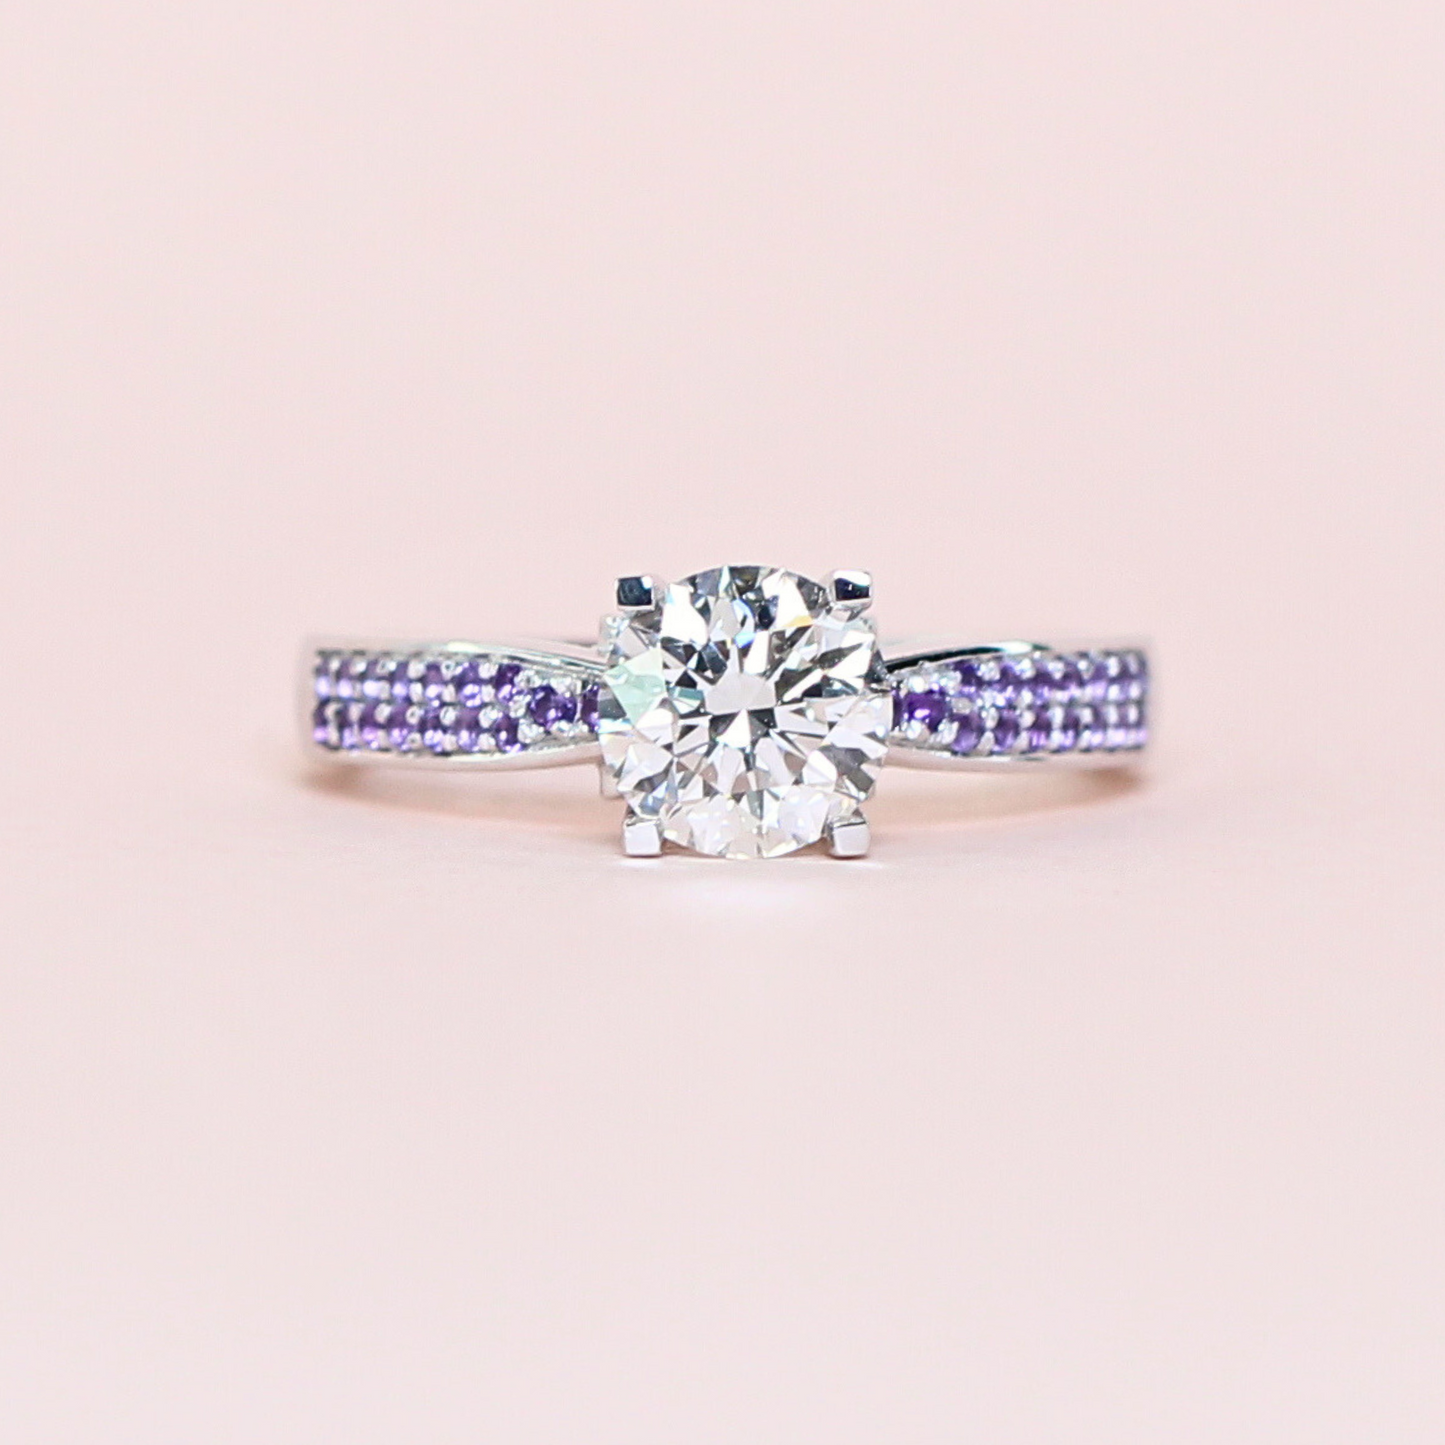 1.23ct Lab-grown Diamond ring with Amethyst stones in Pave setting